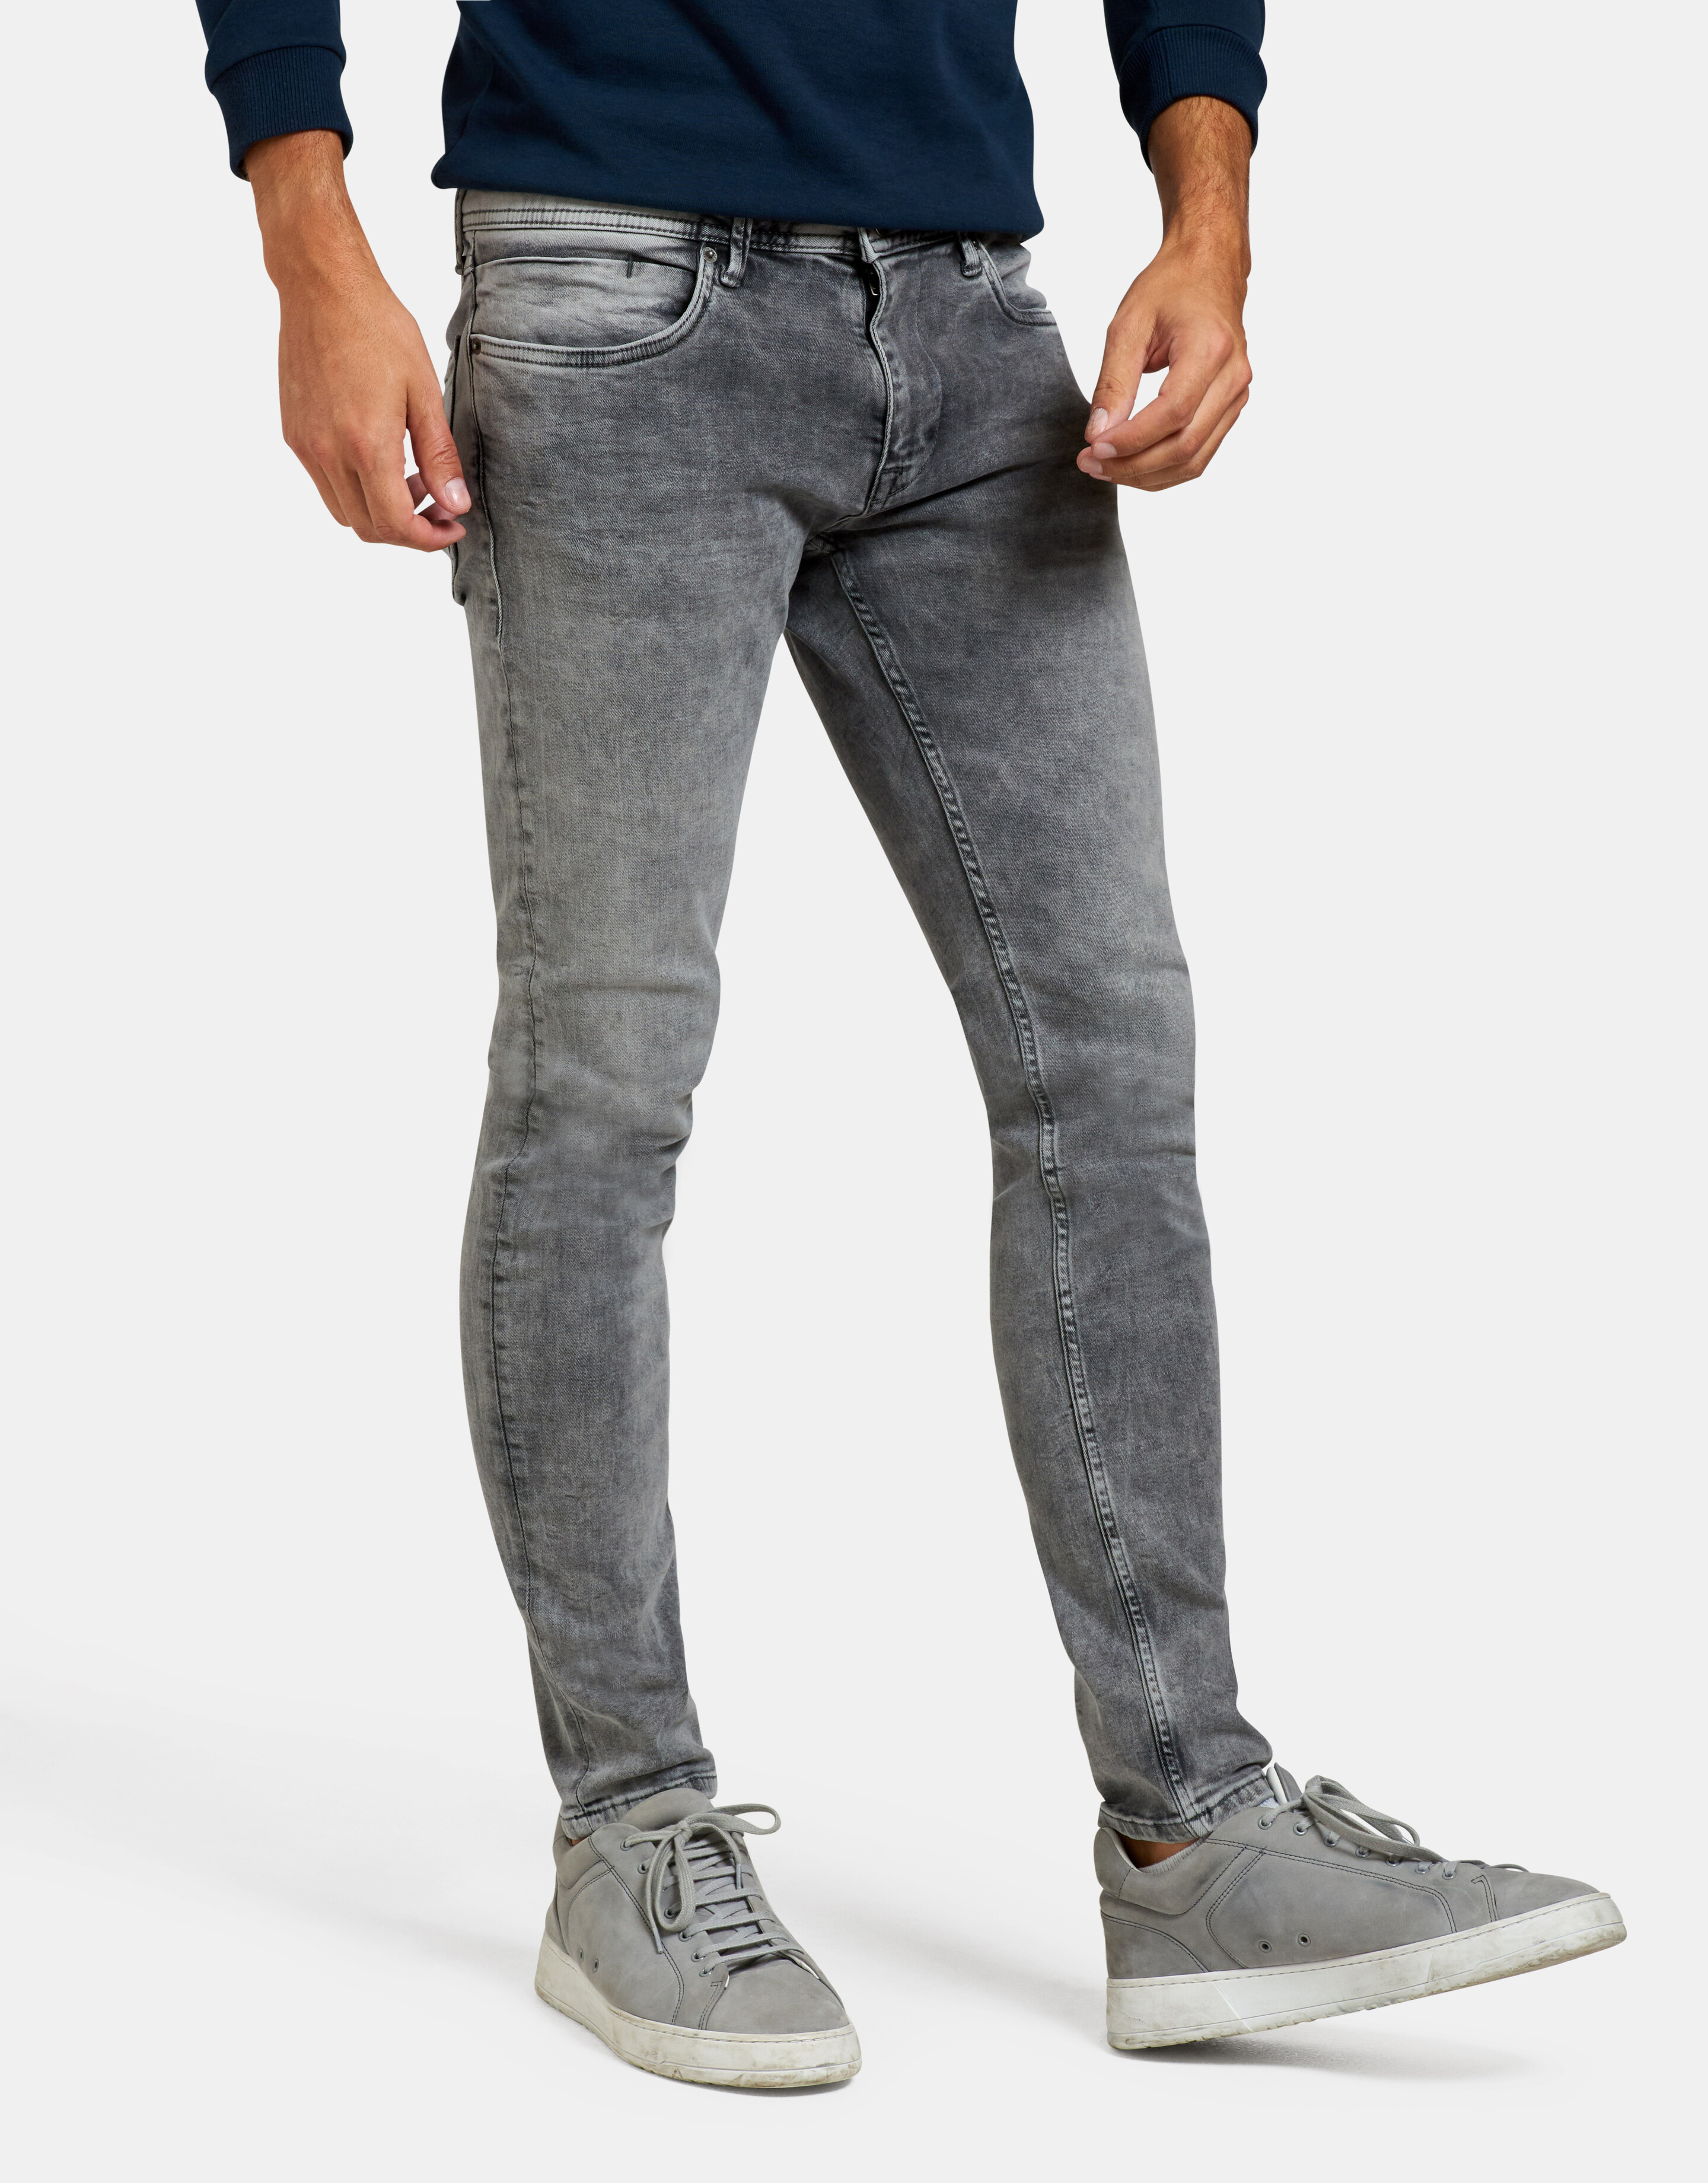 Leroy Skinny Grey Jeans L32 REFILL AUTHENTIC